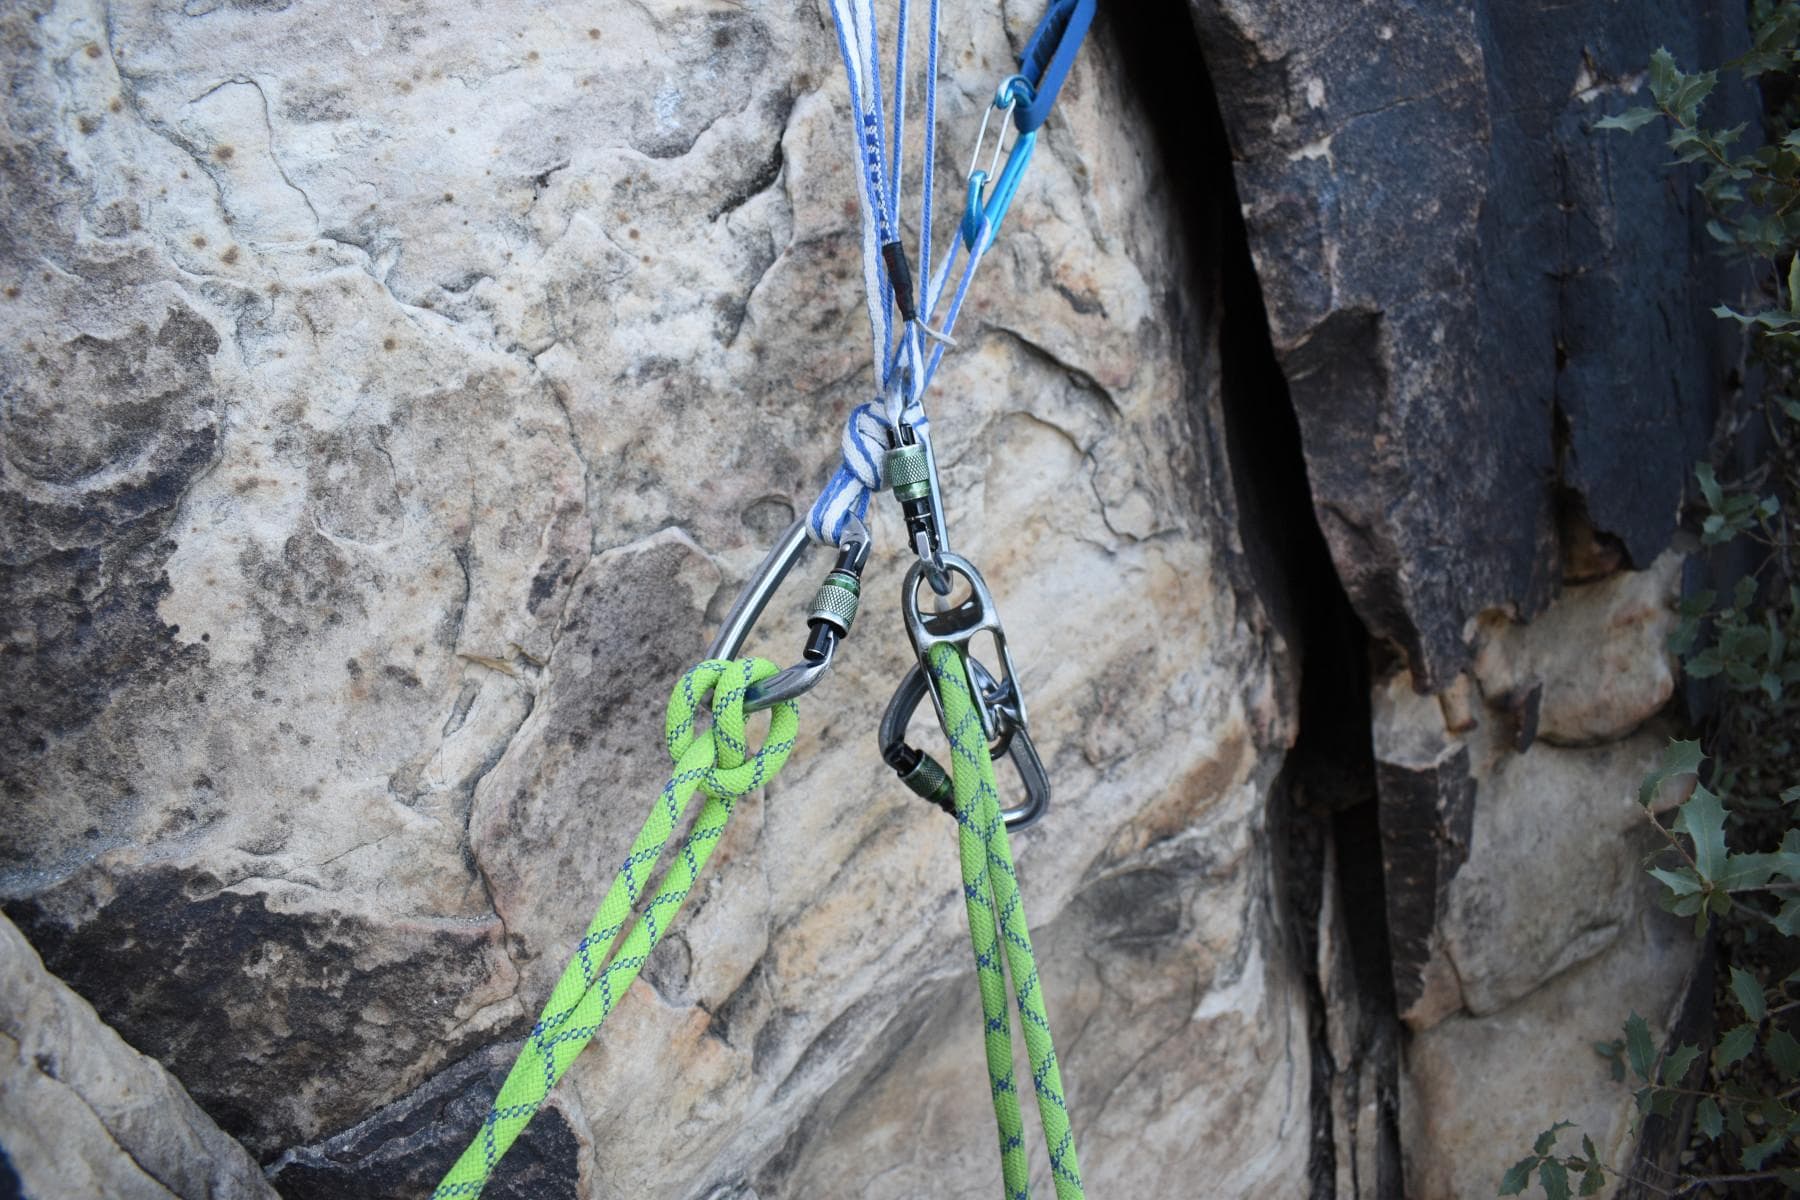 Belaying from the shelf